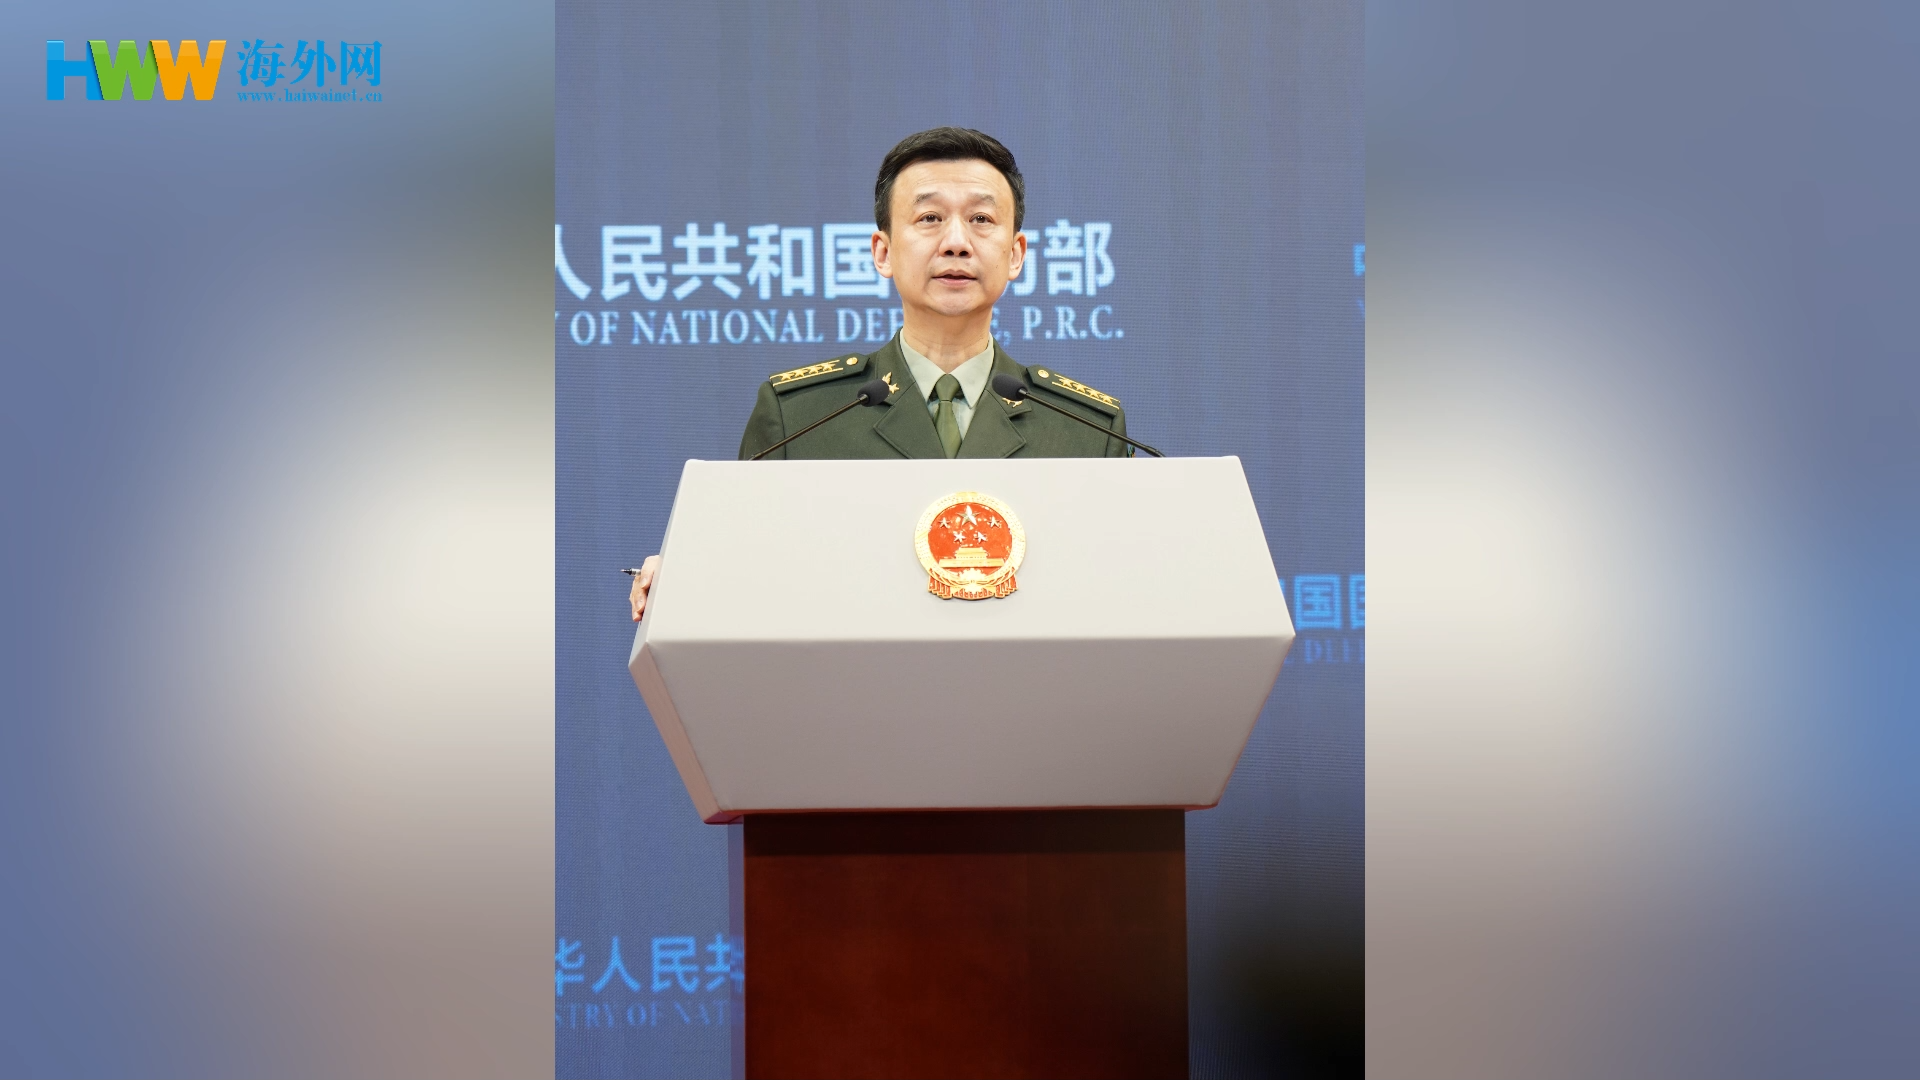  Overseas Network Takes You to the Regular Press Conference of the Ministry of Defense